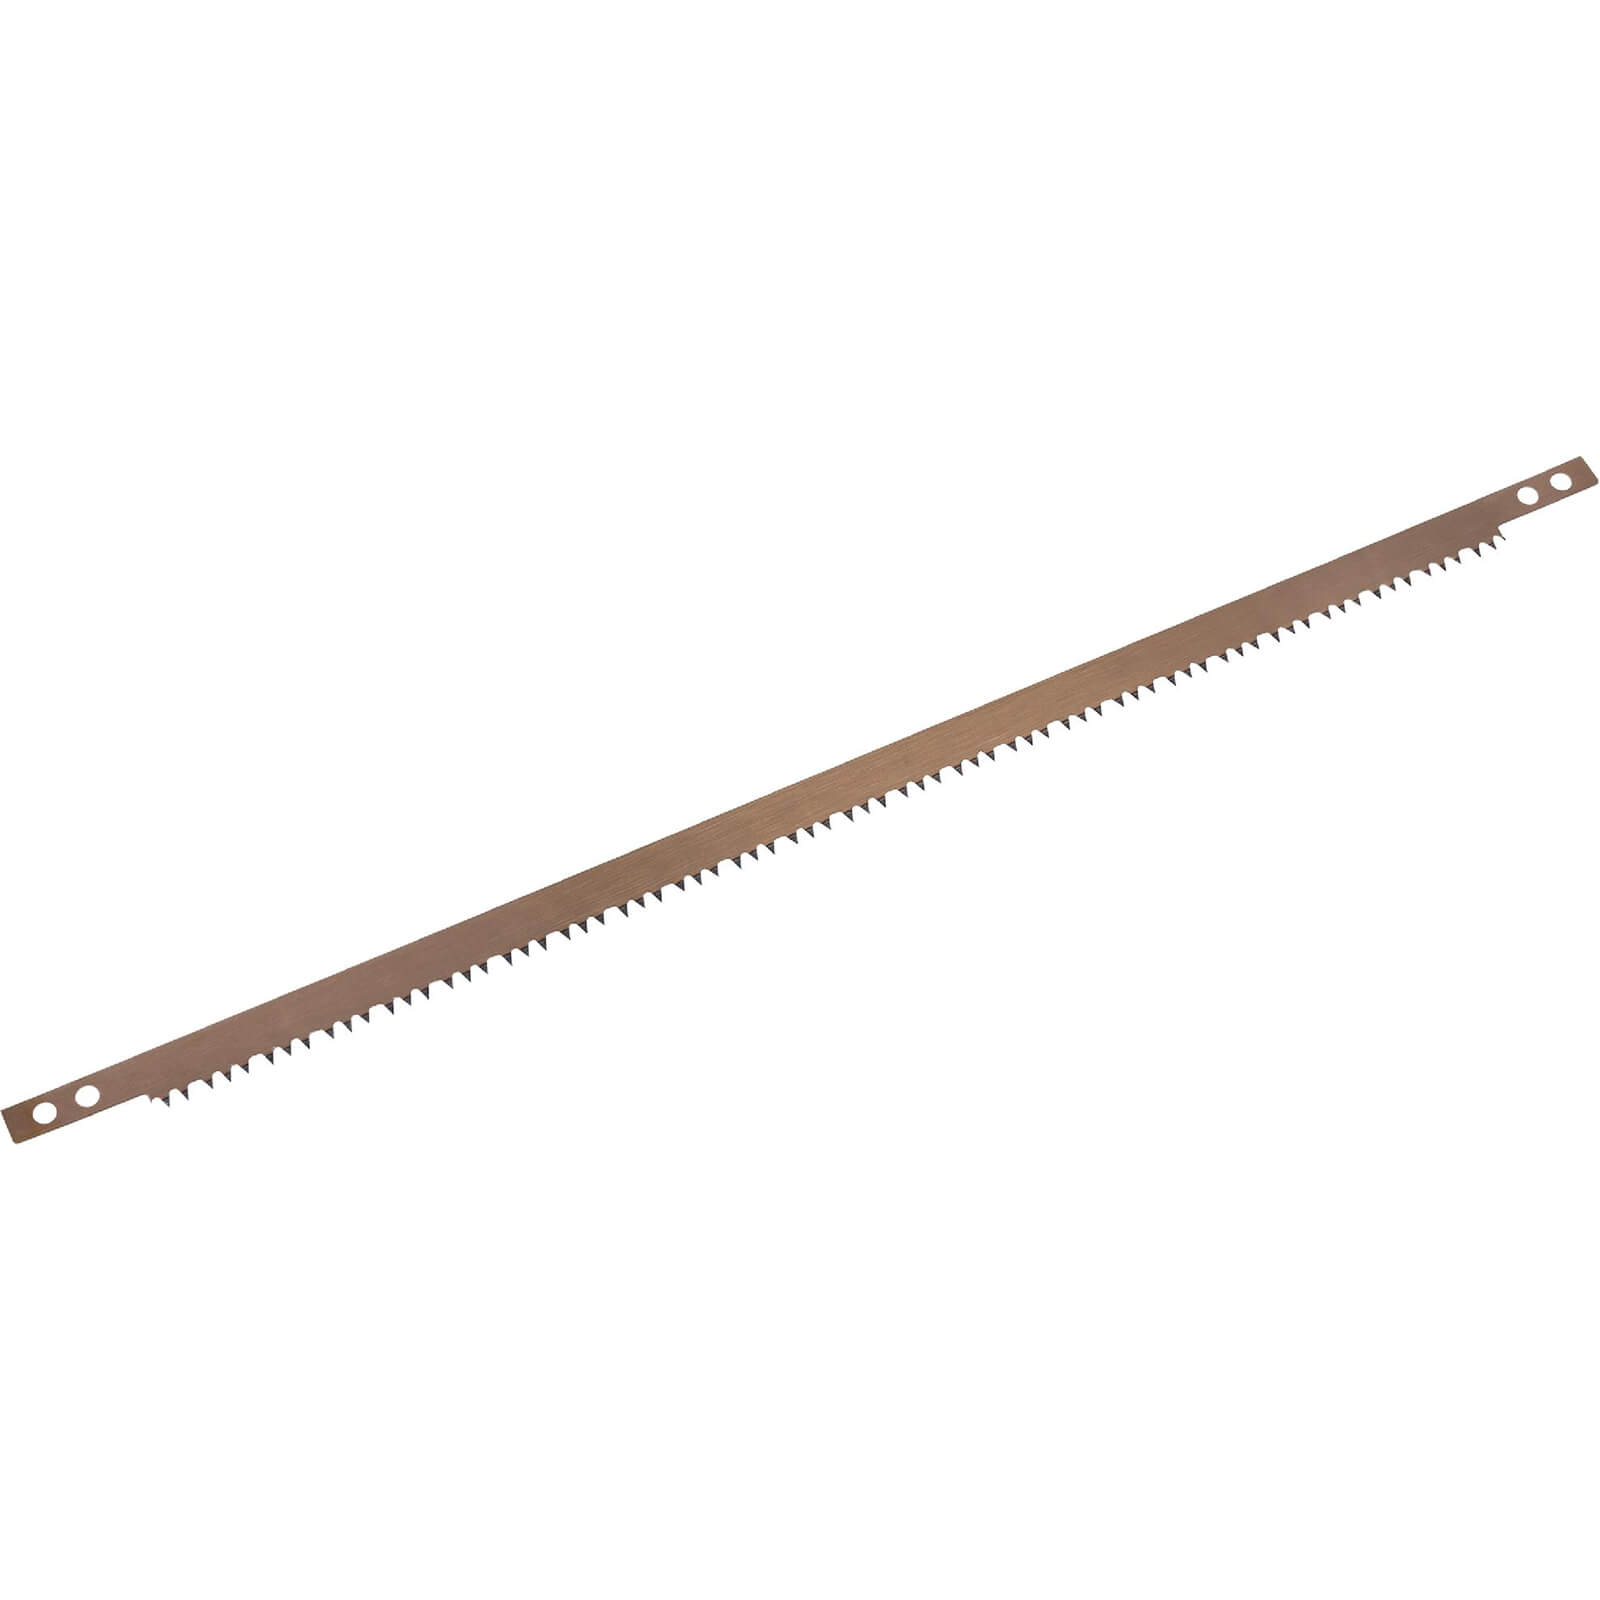 Photo of Roughneck Bow Saw Blade With Small Teeth 21